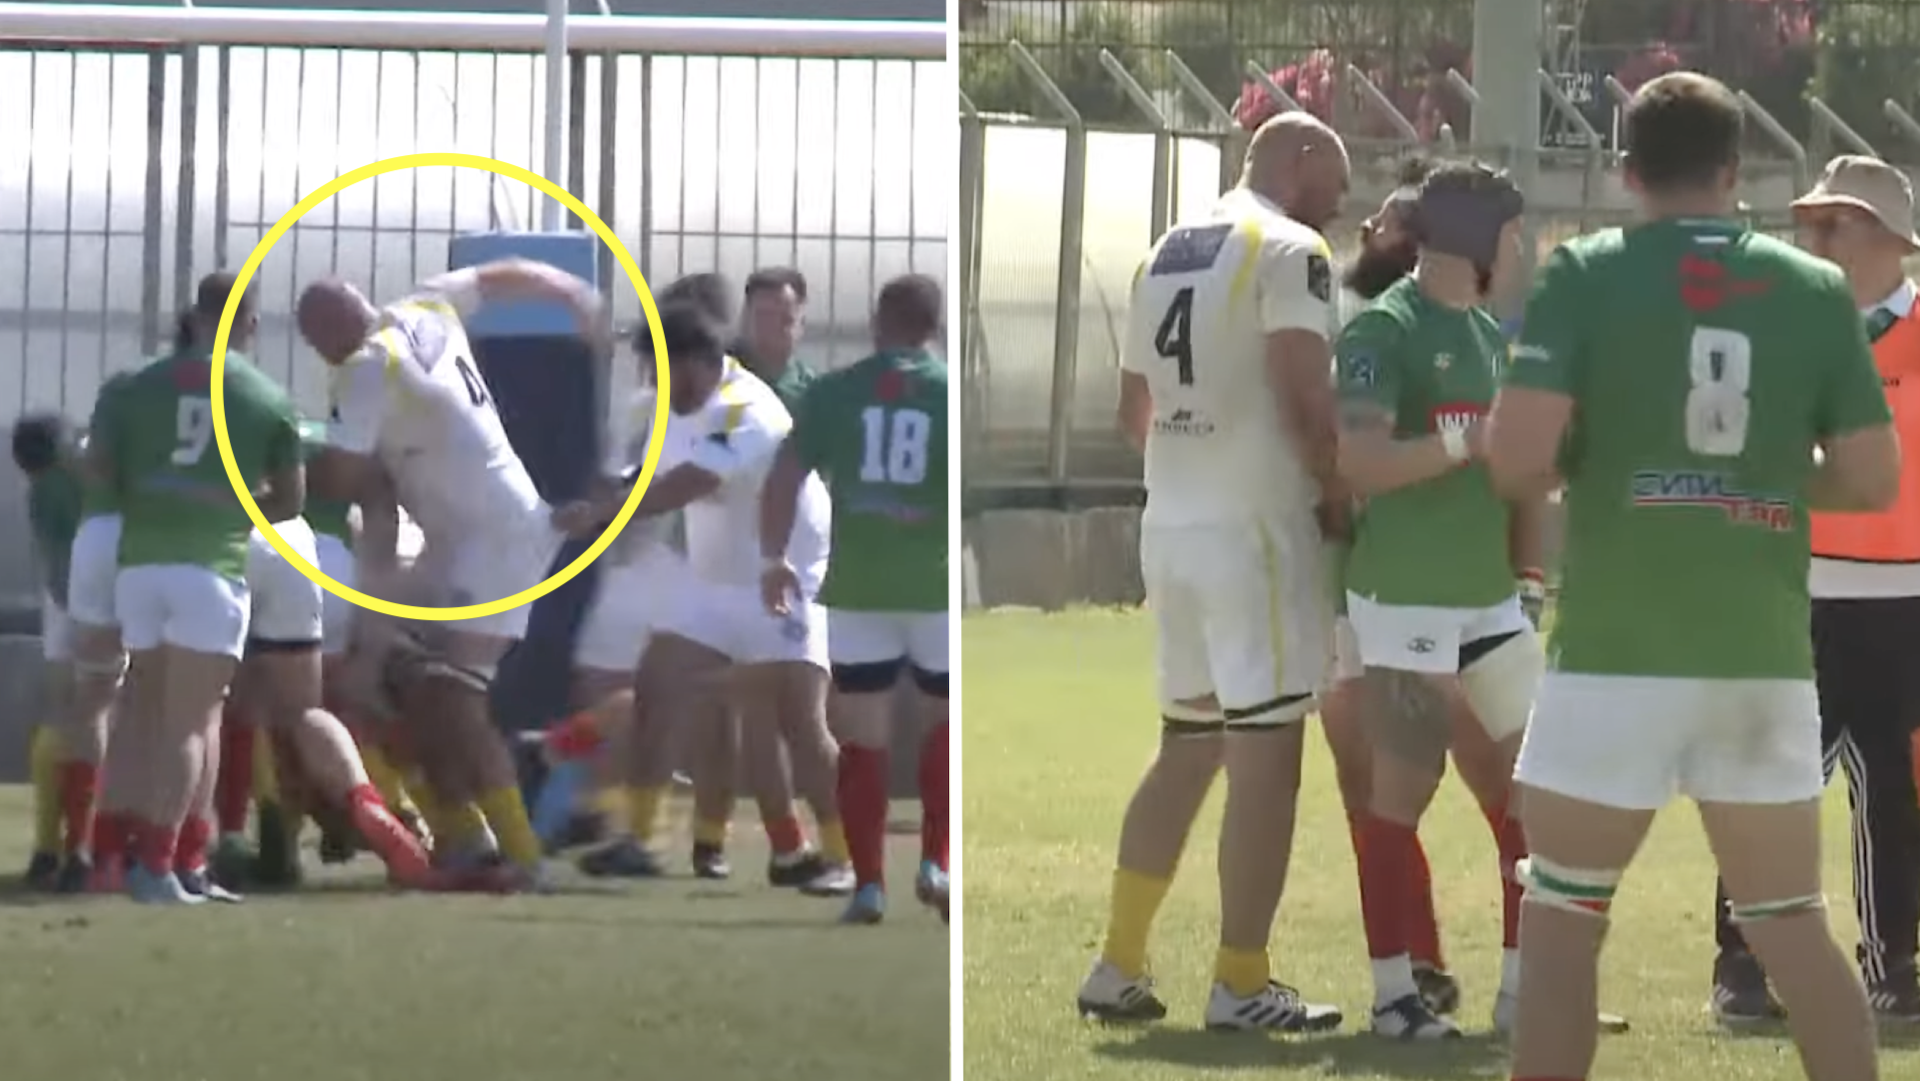 Big ban as old school punch up from suspected gouge spills over after red card